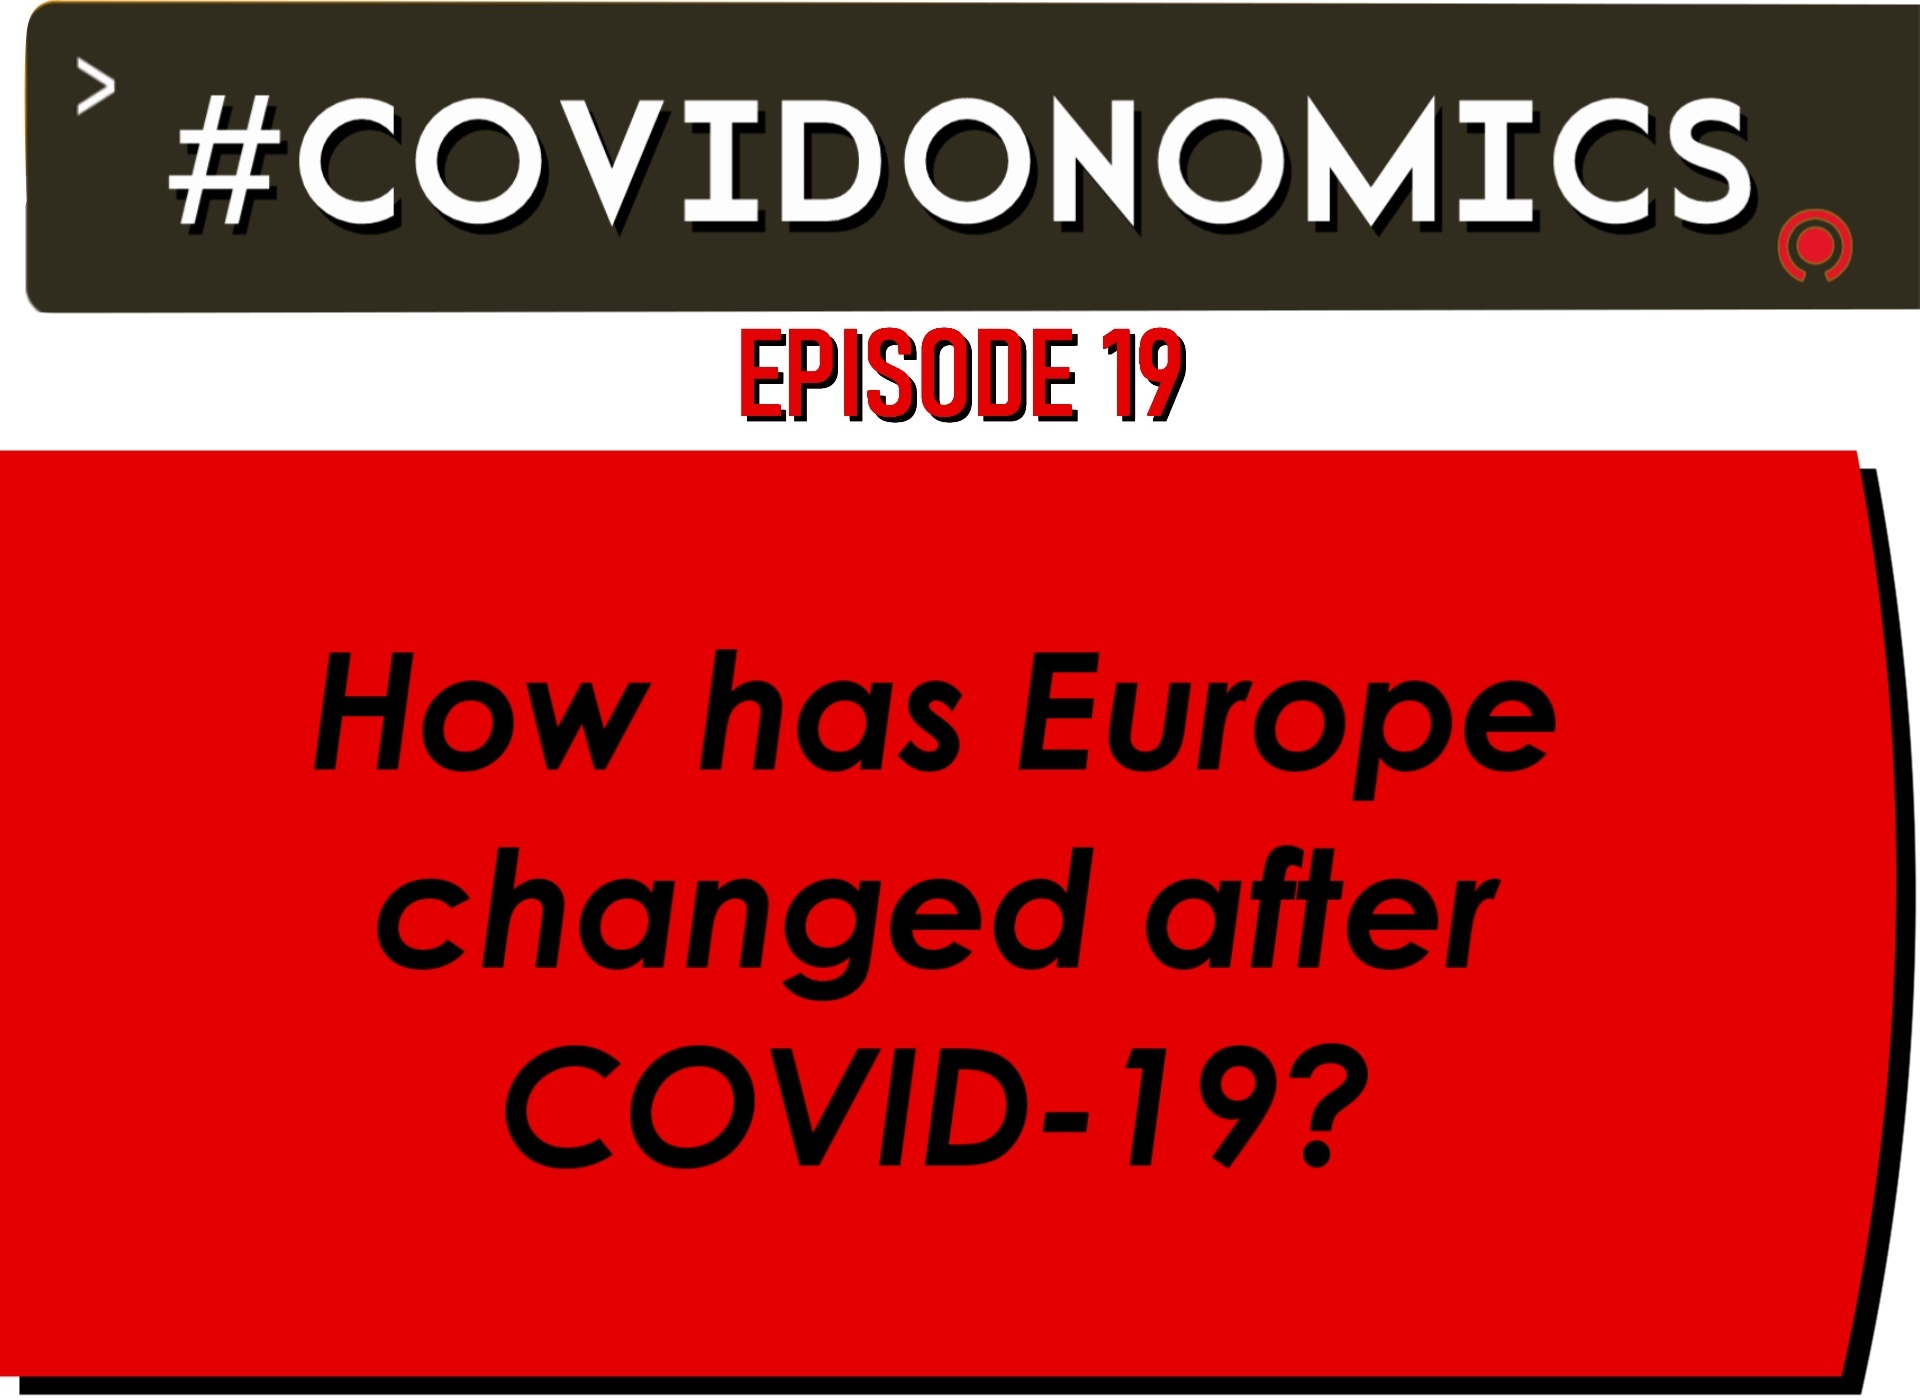 How has Europe changed after COVID- 19?